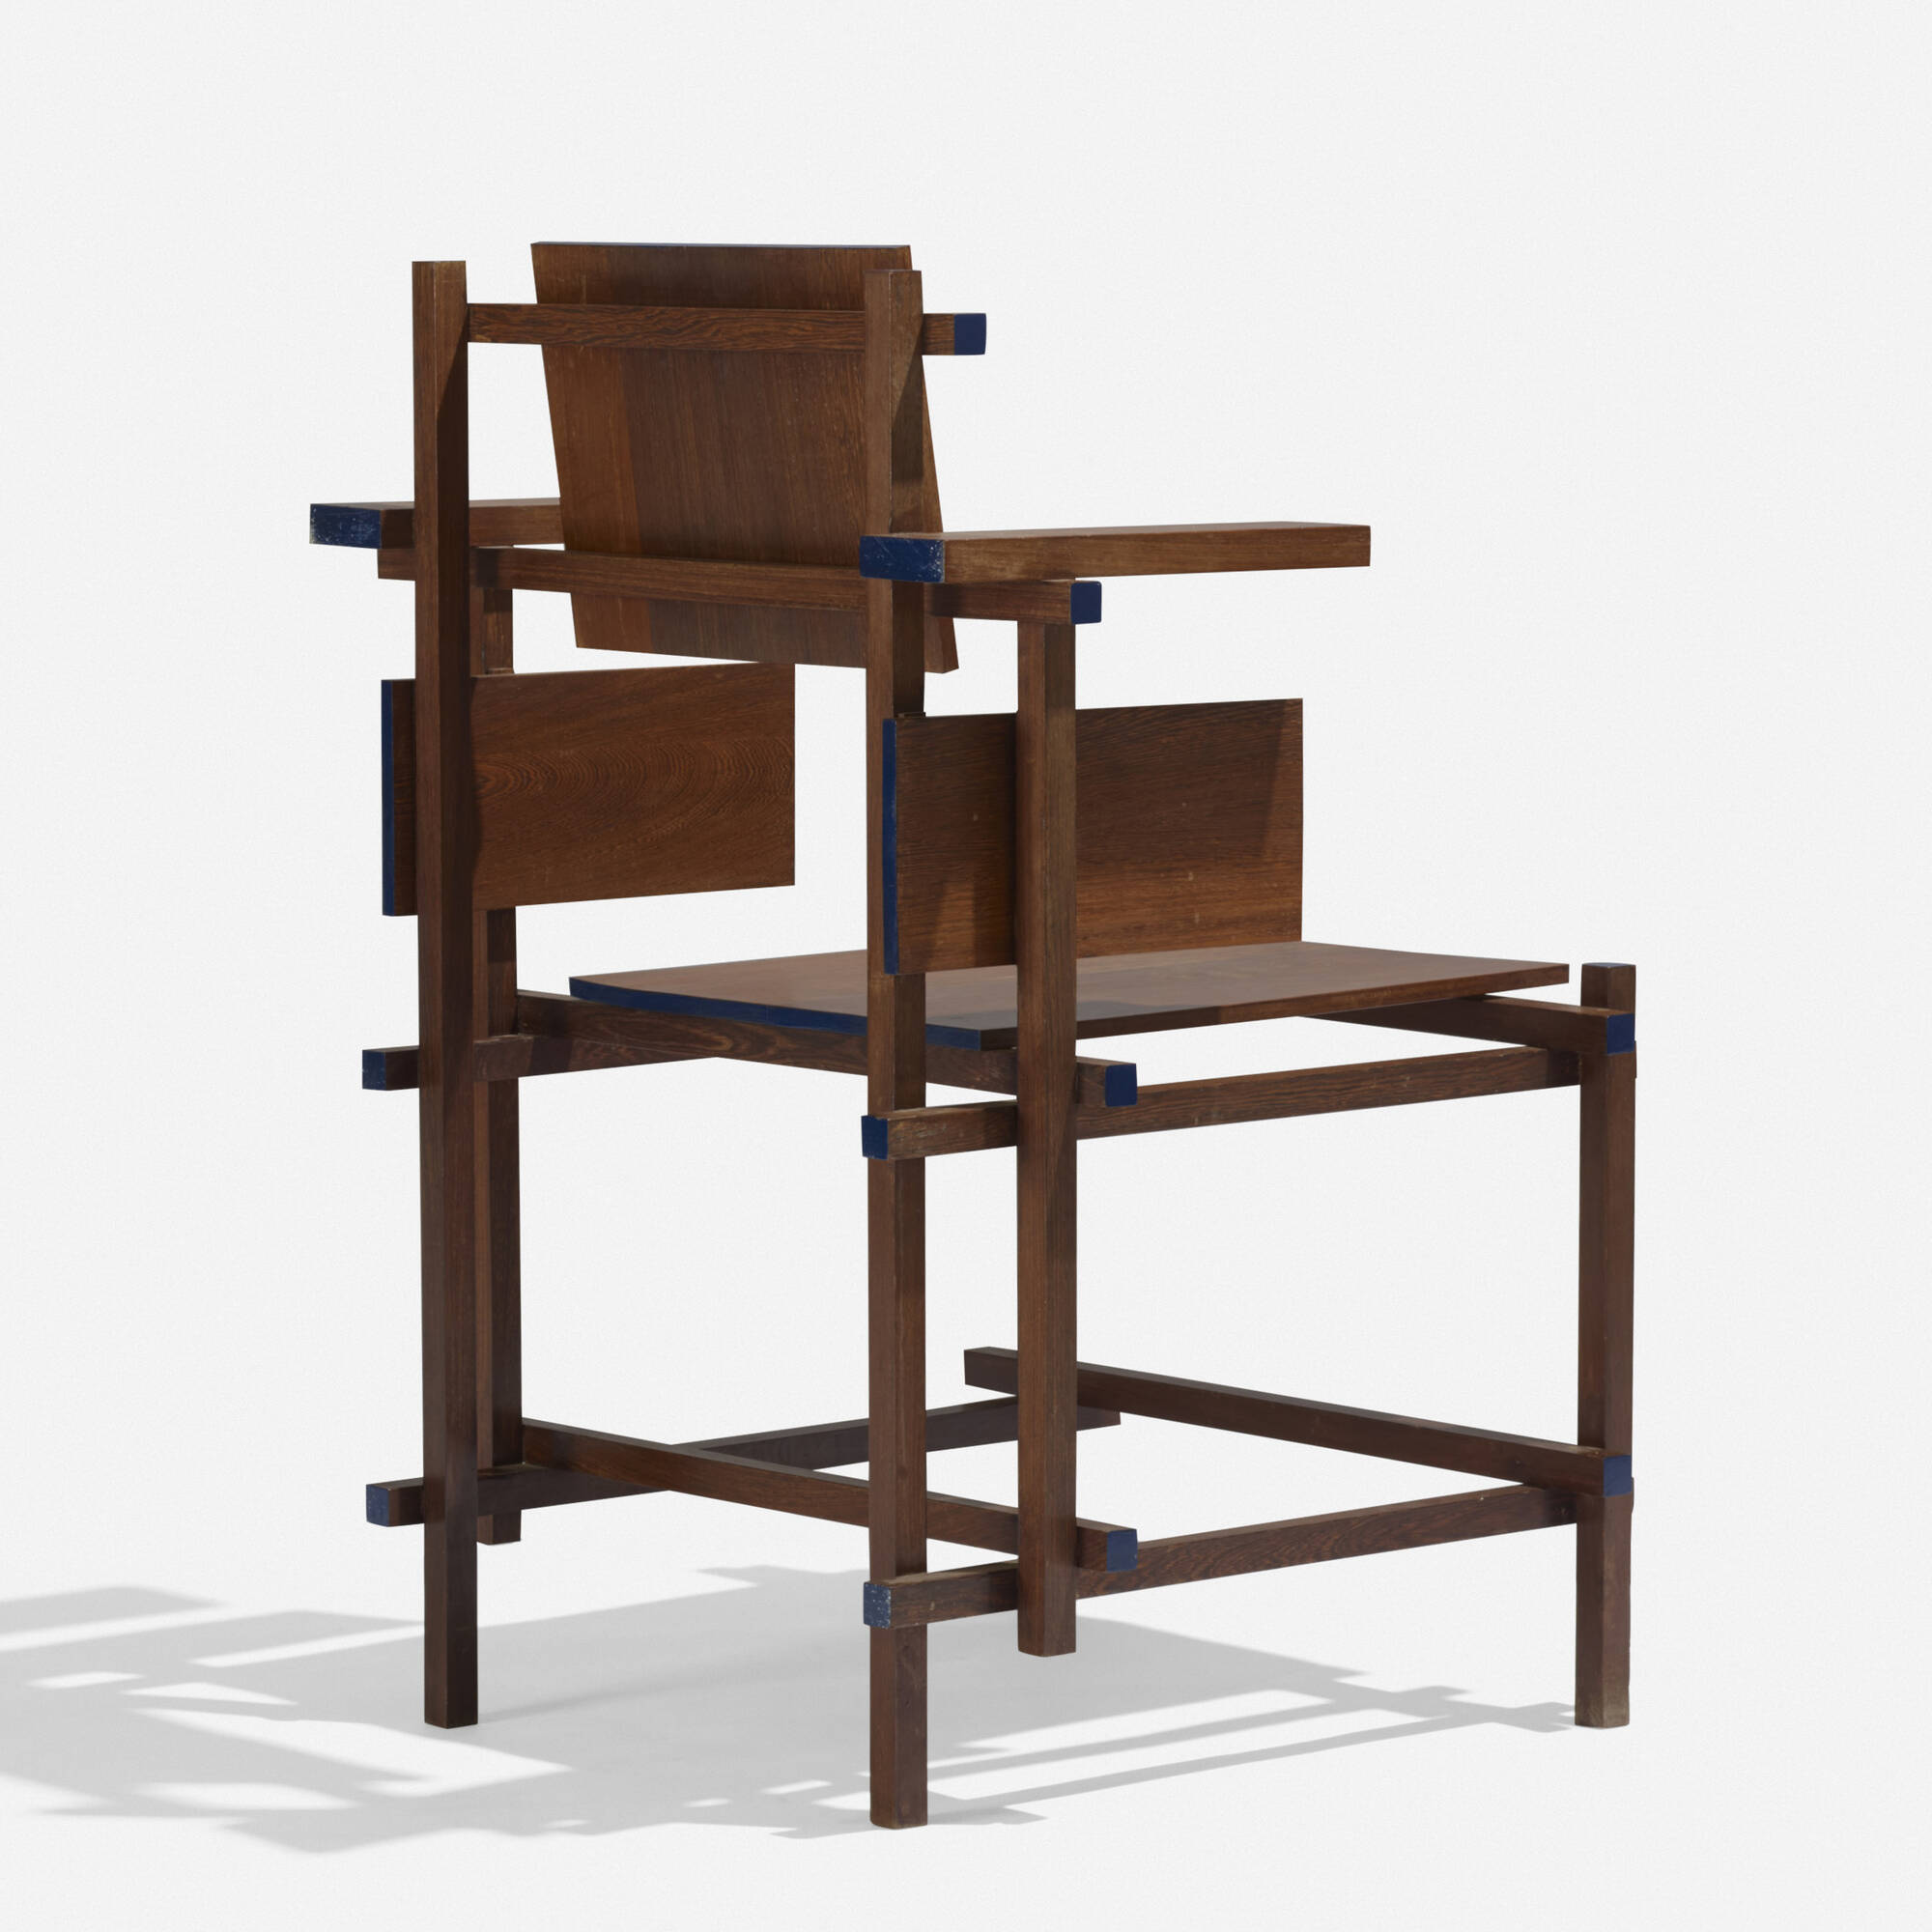 Floreren vergeten Knorretje 107: GERRIT RIETVELD, Hoge Stoel < International Style: The Boyd  Collection, 7 November 2019 < Auctions | Wright: Auctions of Art and Design